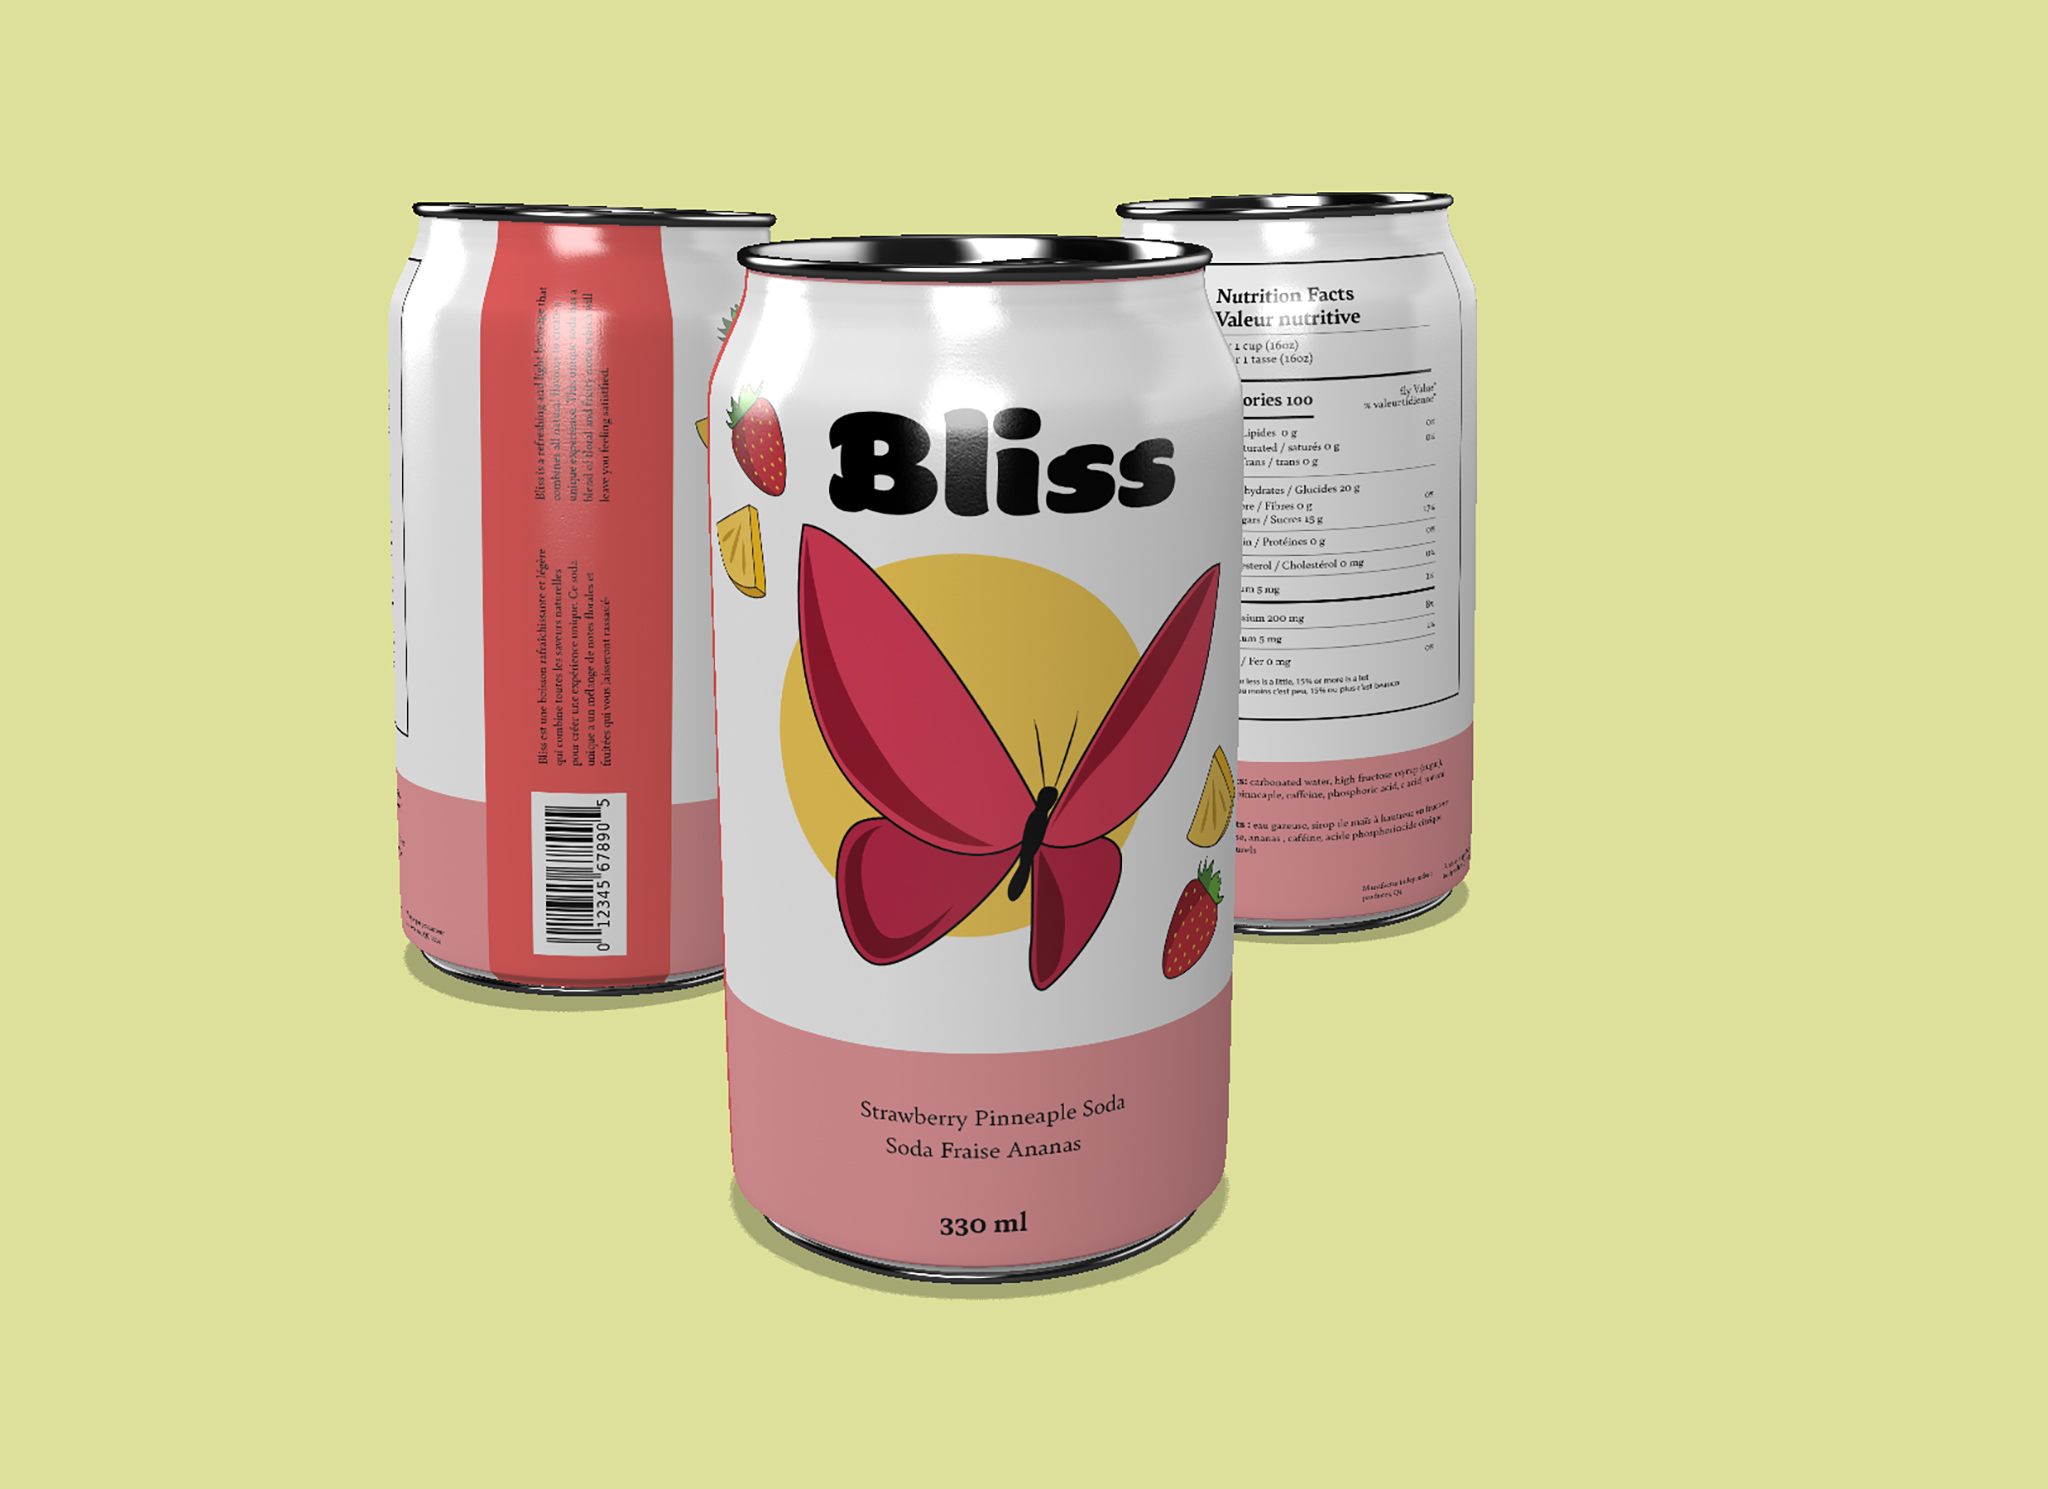 A red soda can with the flavour "lavender and blueberry". There is an illustration of a butterfly in the middle